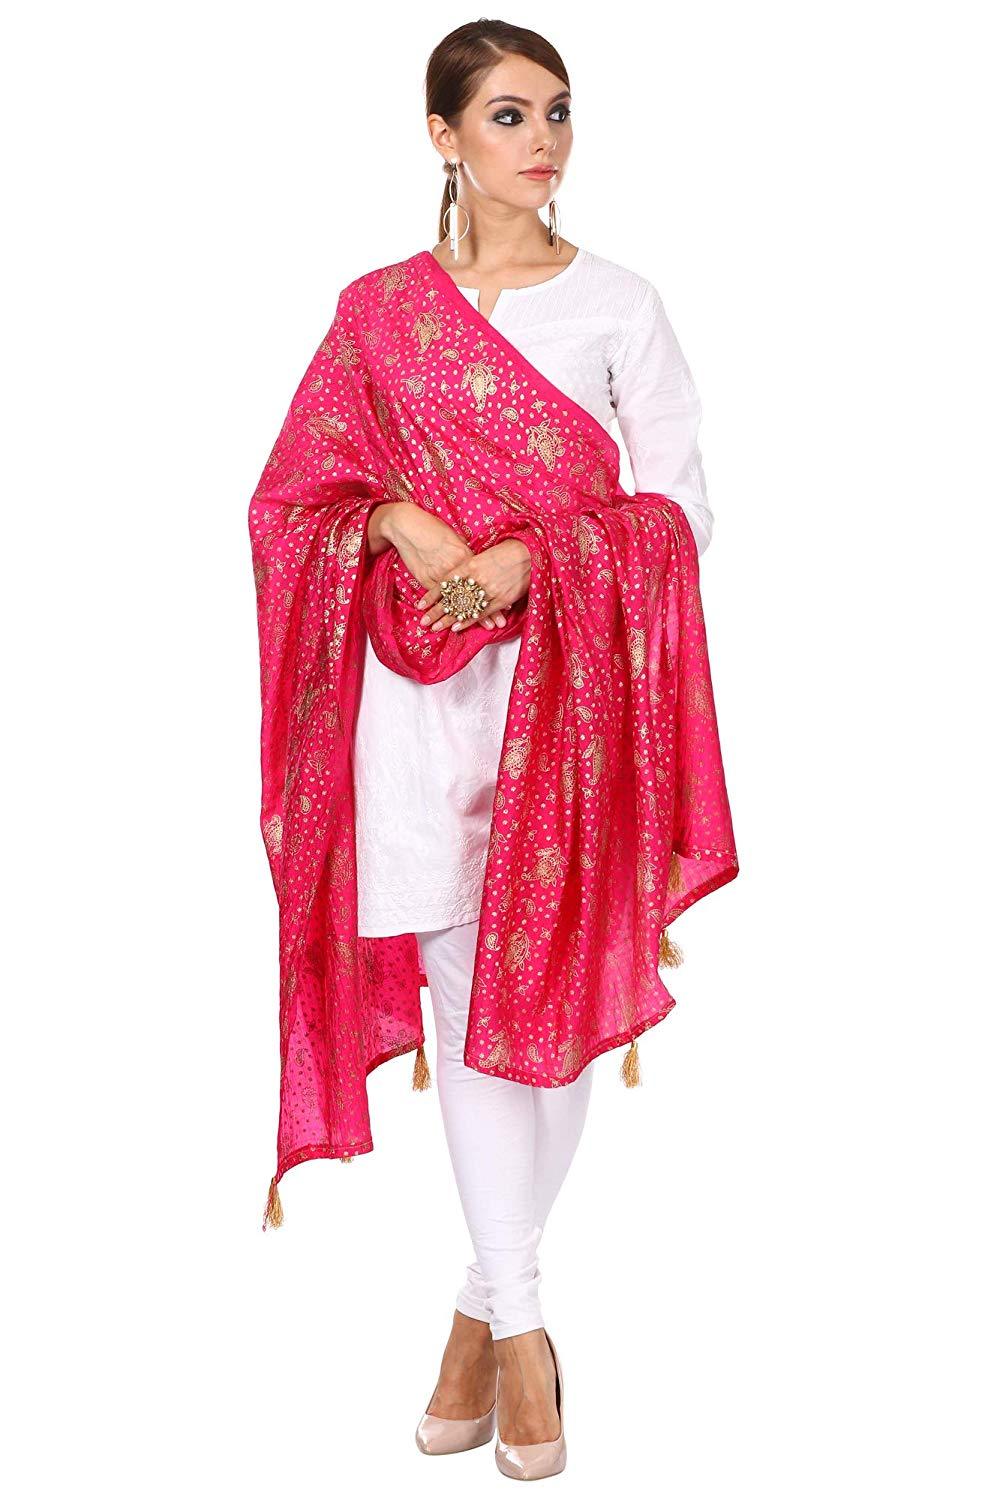 Pashtush Art Silk Dupatta For Women, With Golden Coloured Foil Printing, Light Weight And Bright, Hot Pink